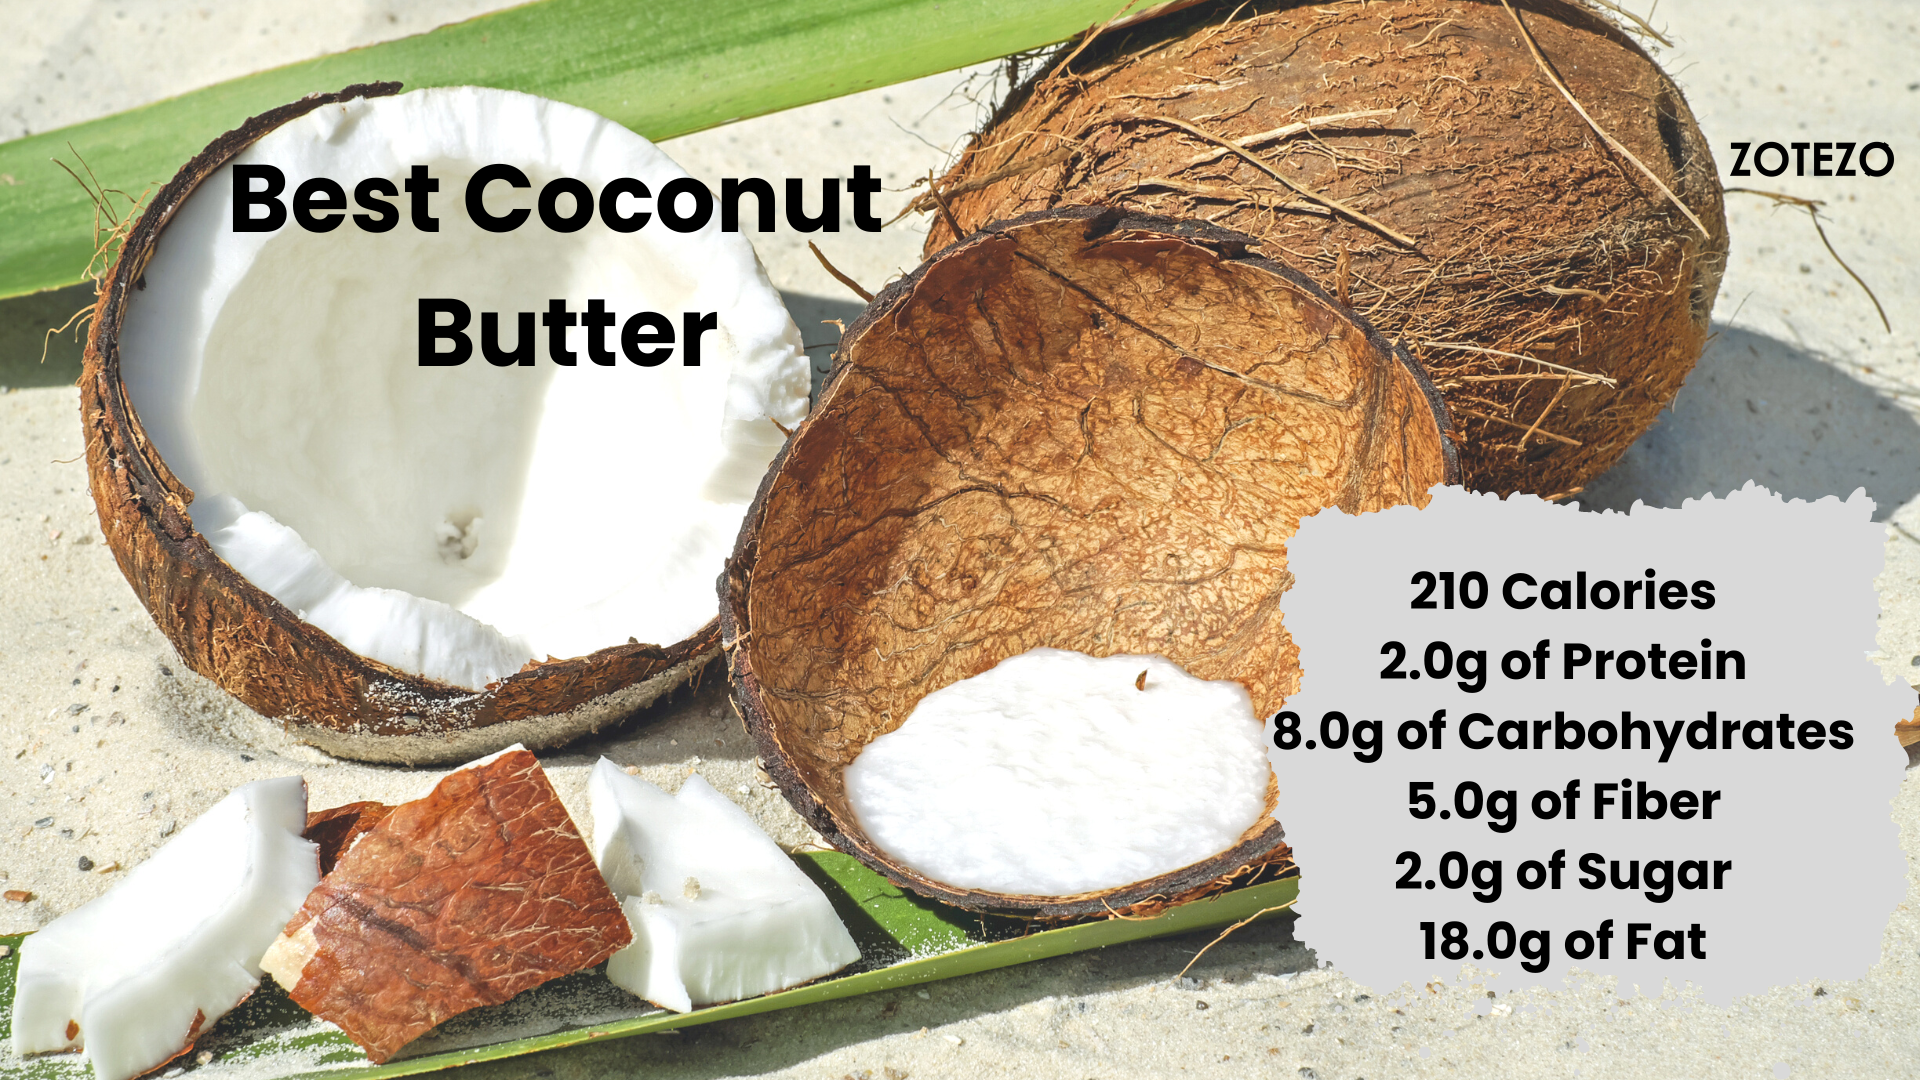 Coconut Butter in Singapore